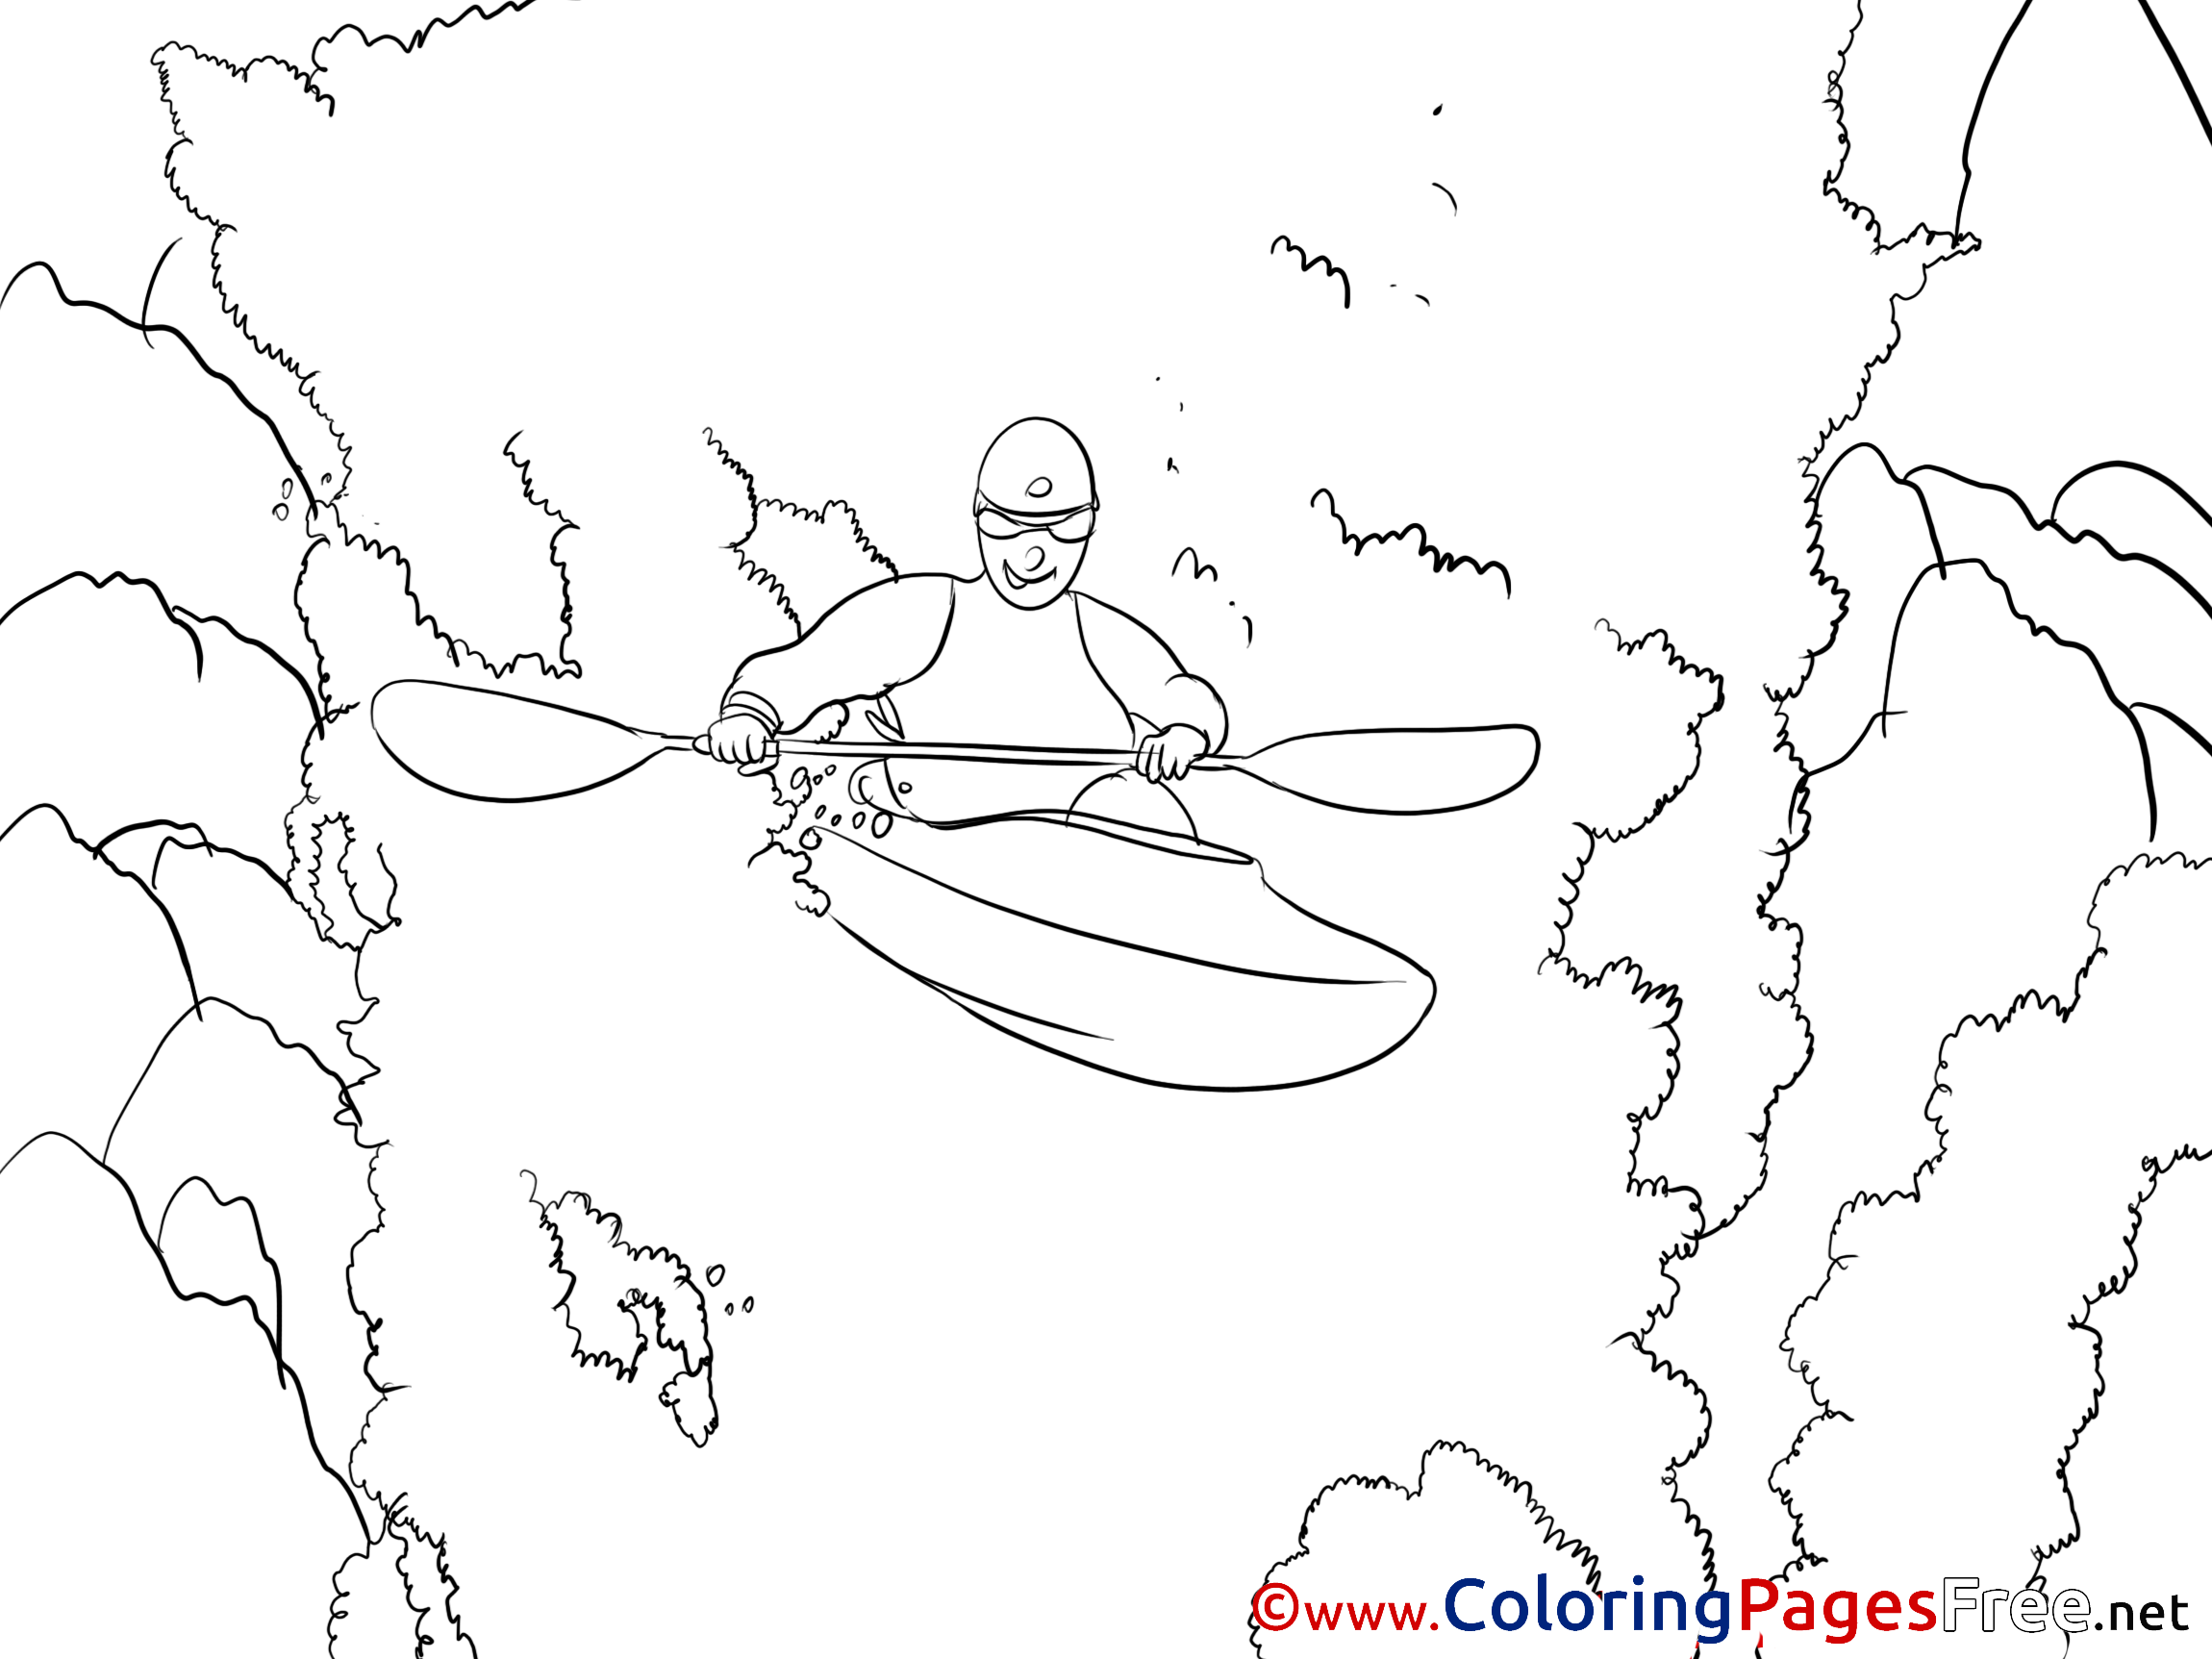 Kayak Children Coloring Pages free